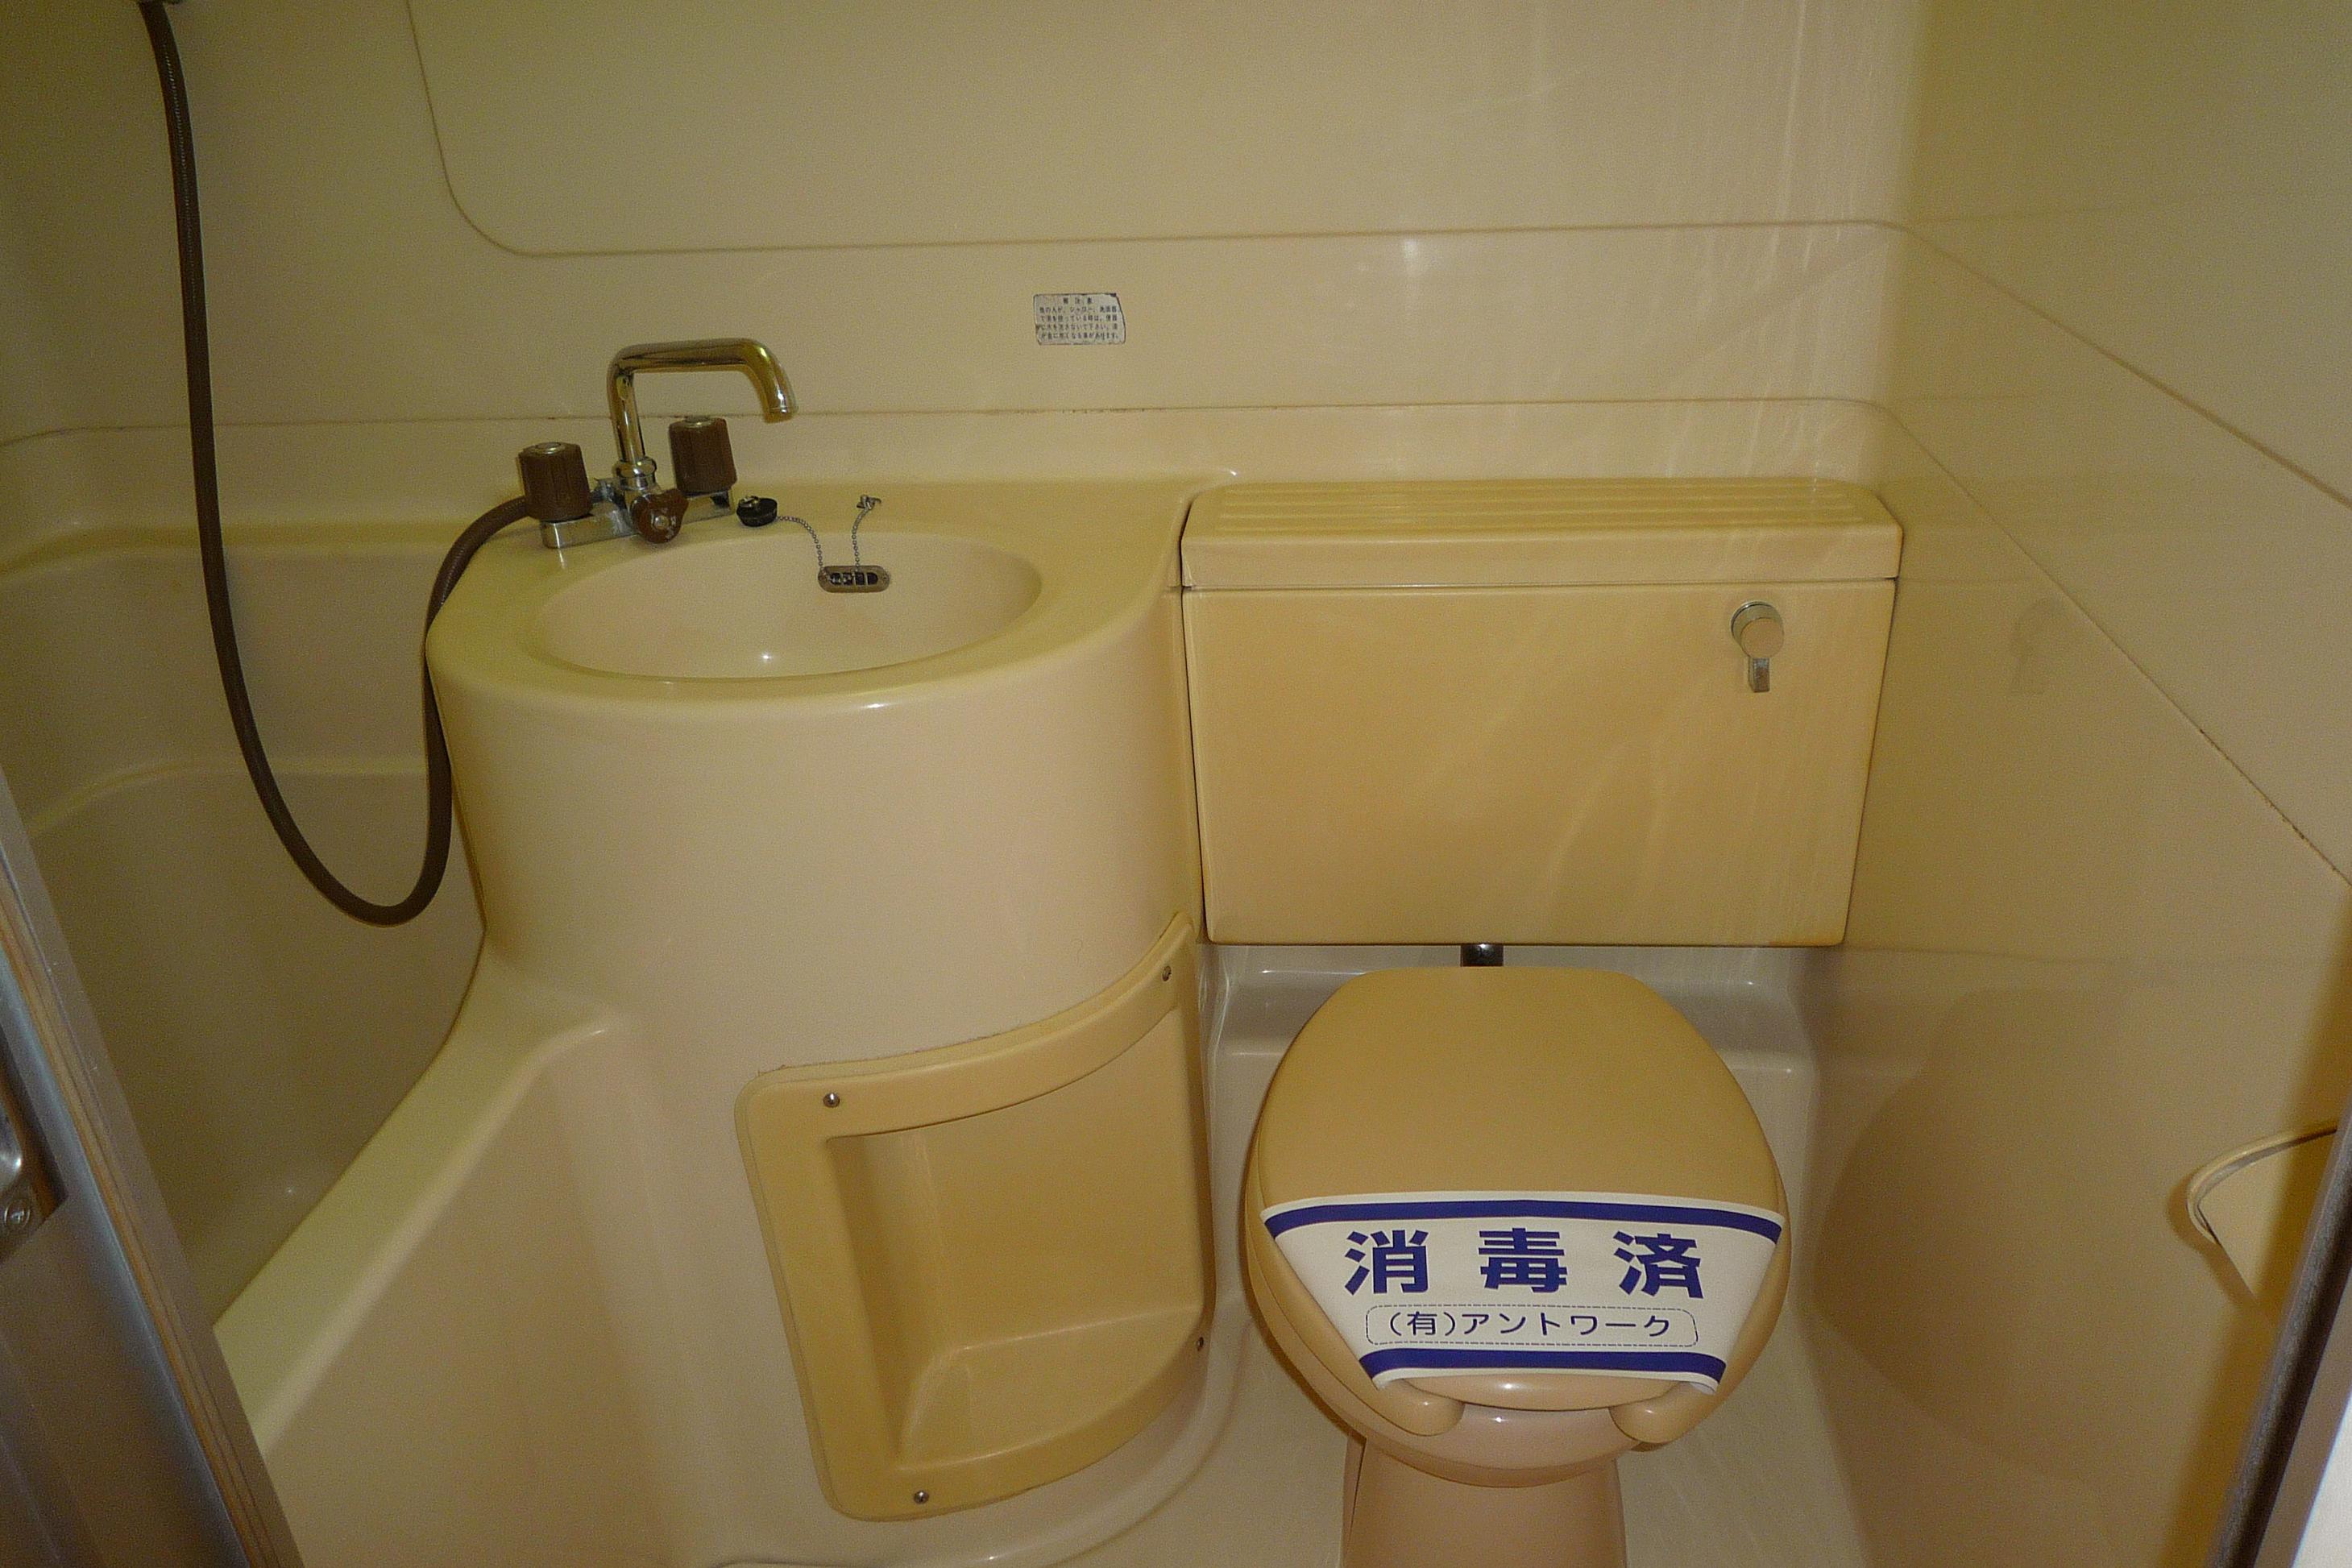 Bath. bus ・ Toilet reference photograph ・ Same building equipment